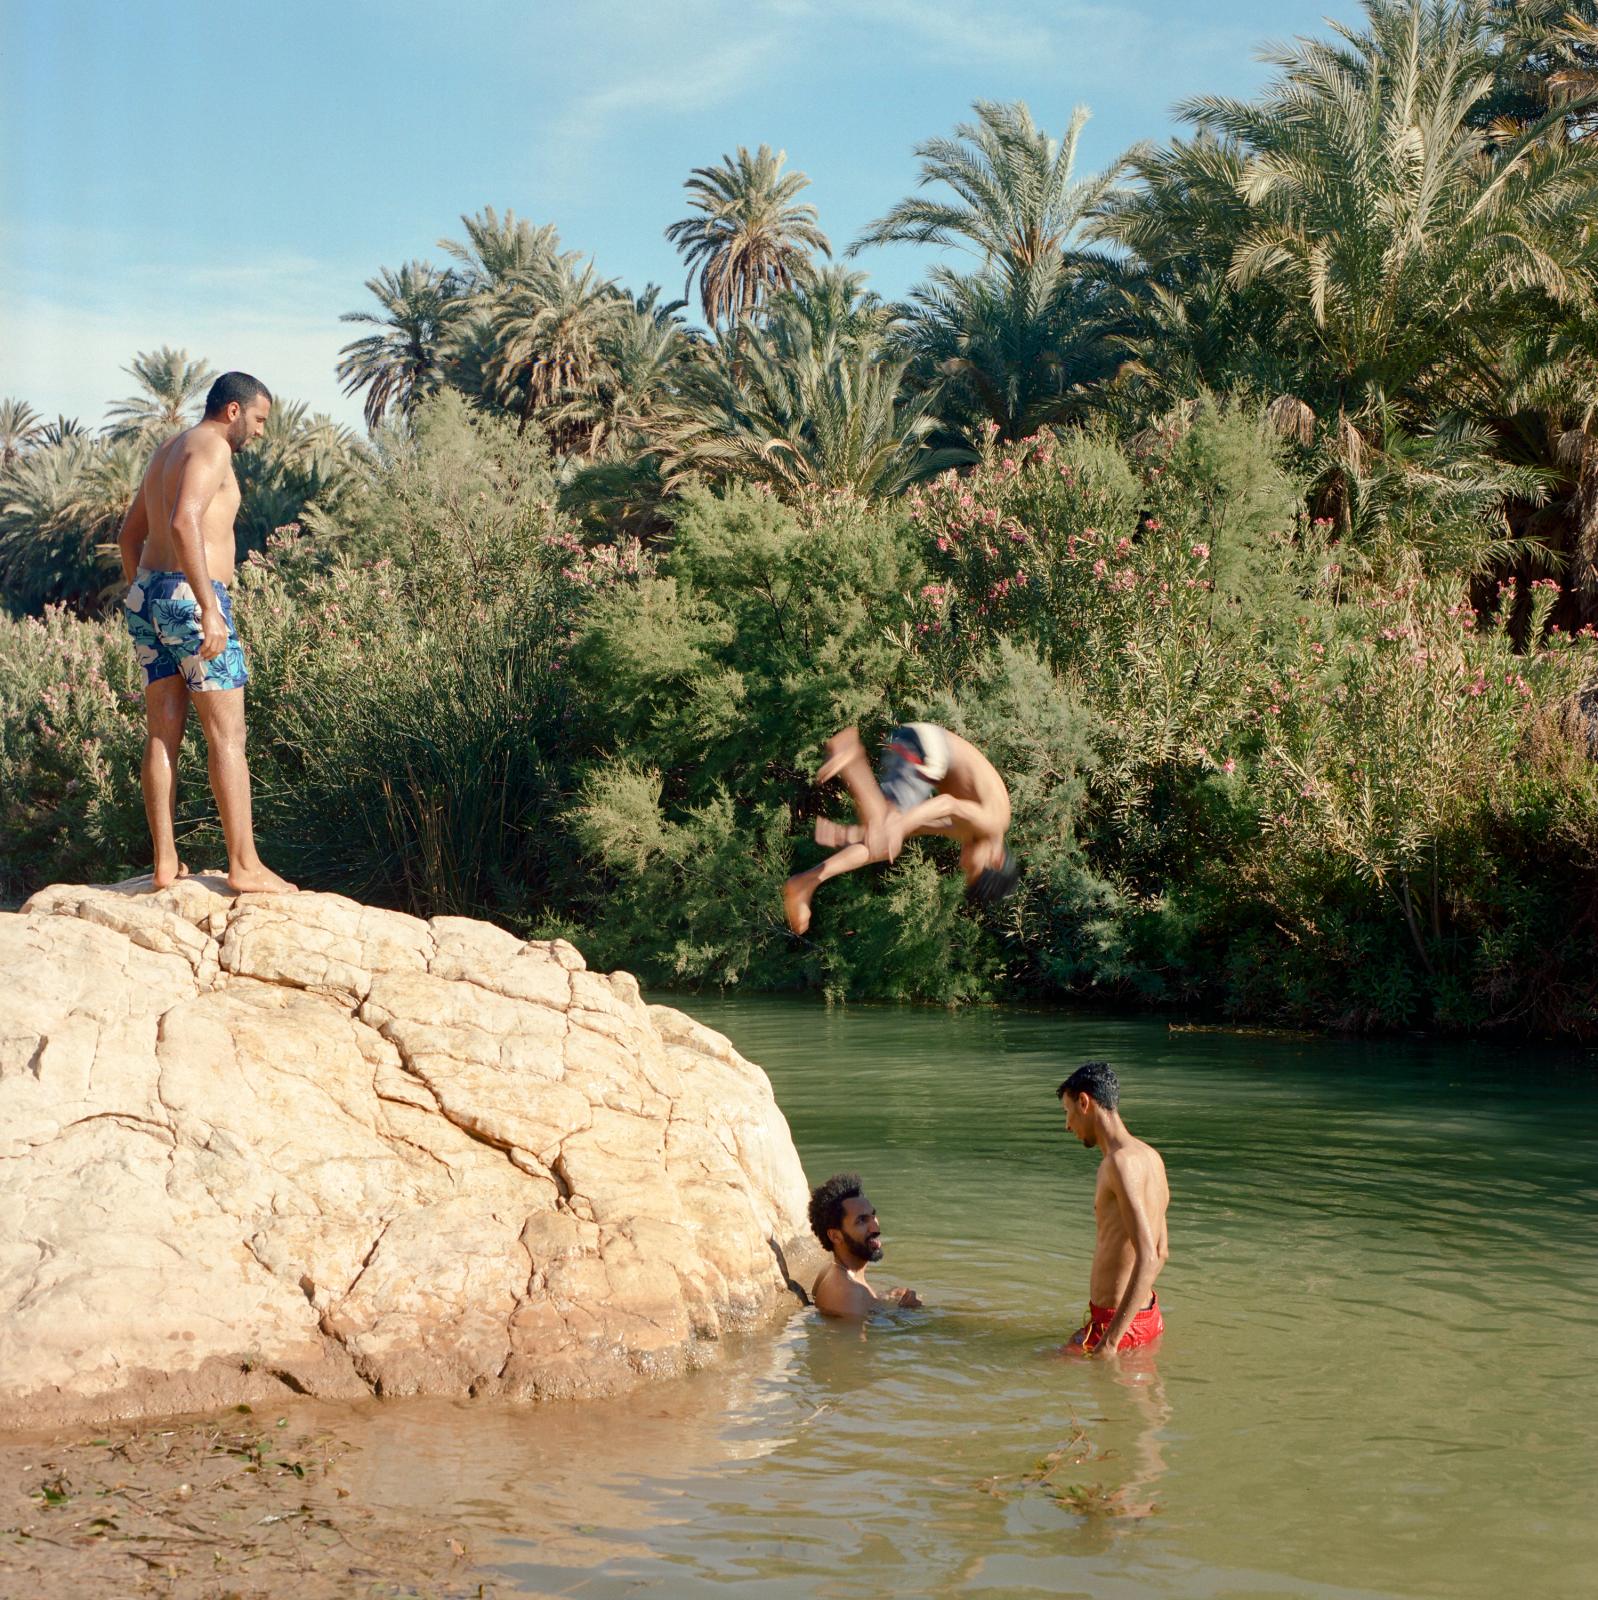 Before it's gone  - Youth swimming in oued Sayad at Taghjijt Oasis